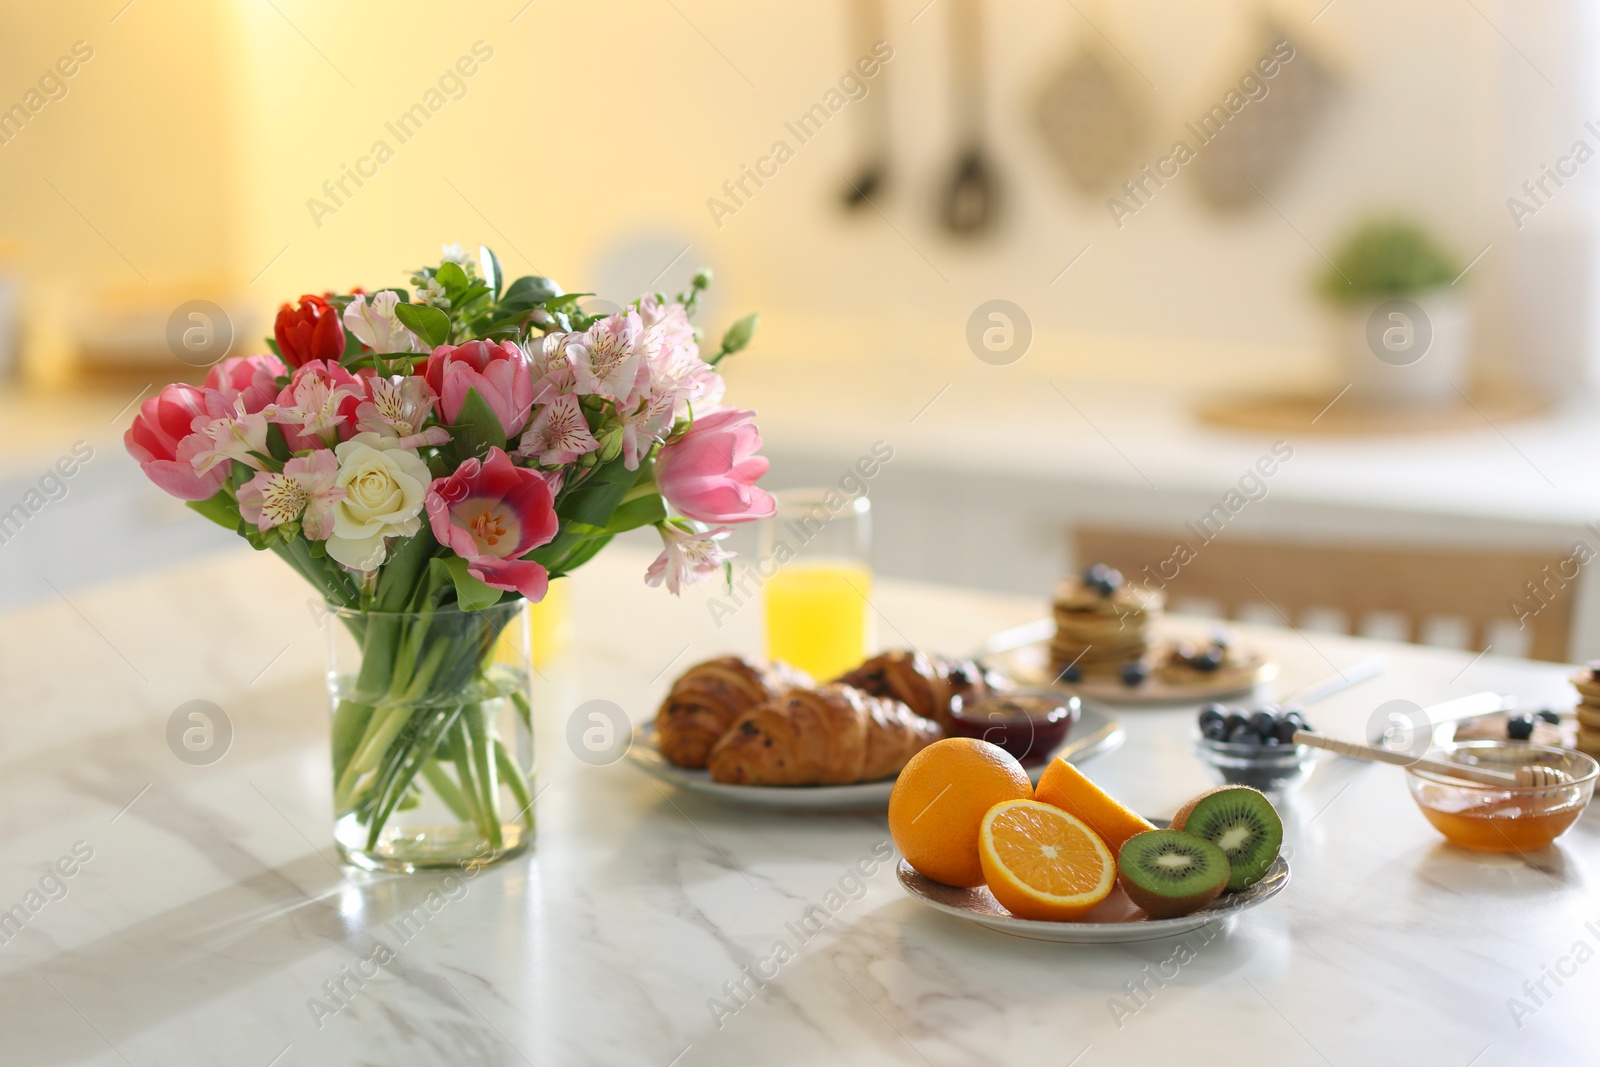 Photo of Bouquet of beautiful flowers in vase and food for breakfast on white marble table